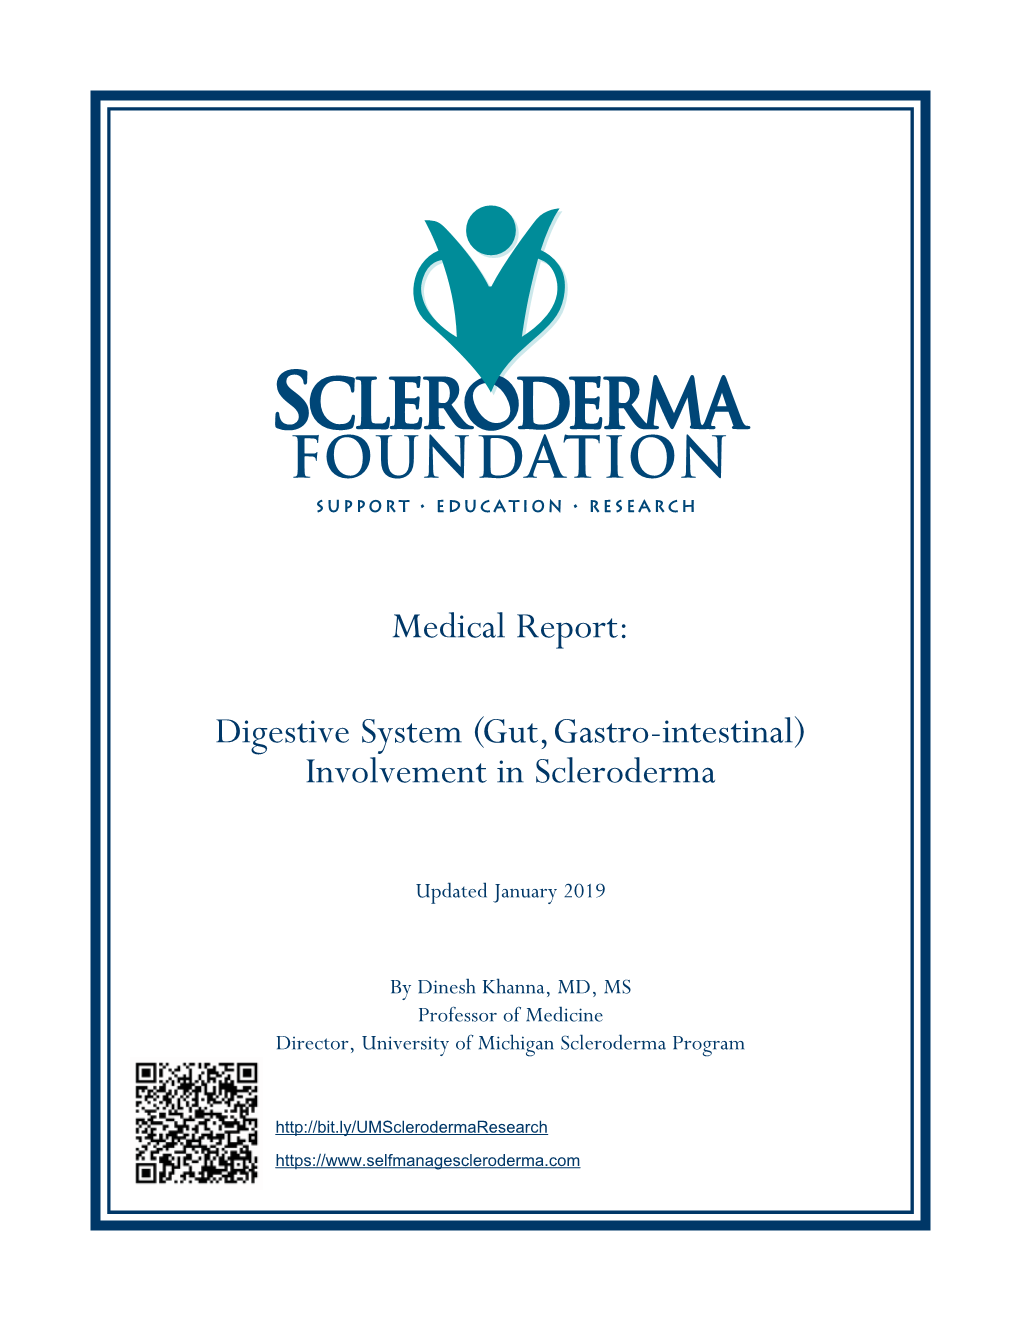 Medical Report: Digestive System (Gut, Gastro-Intestinal) Involvement in Scleroderma